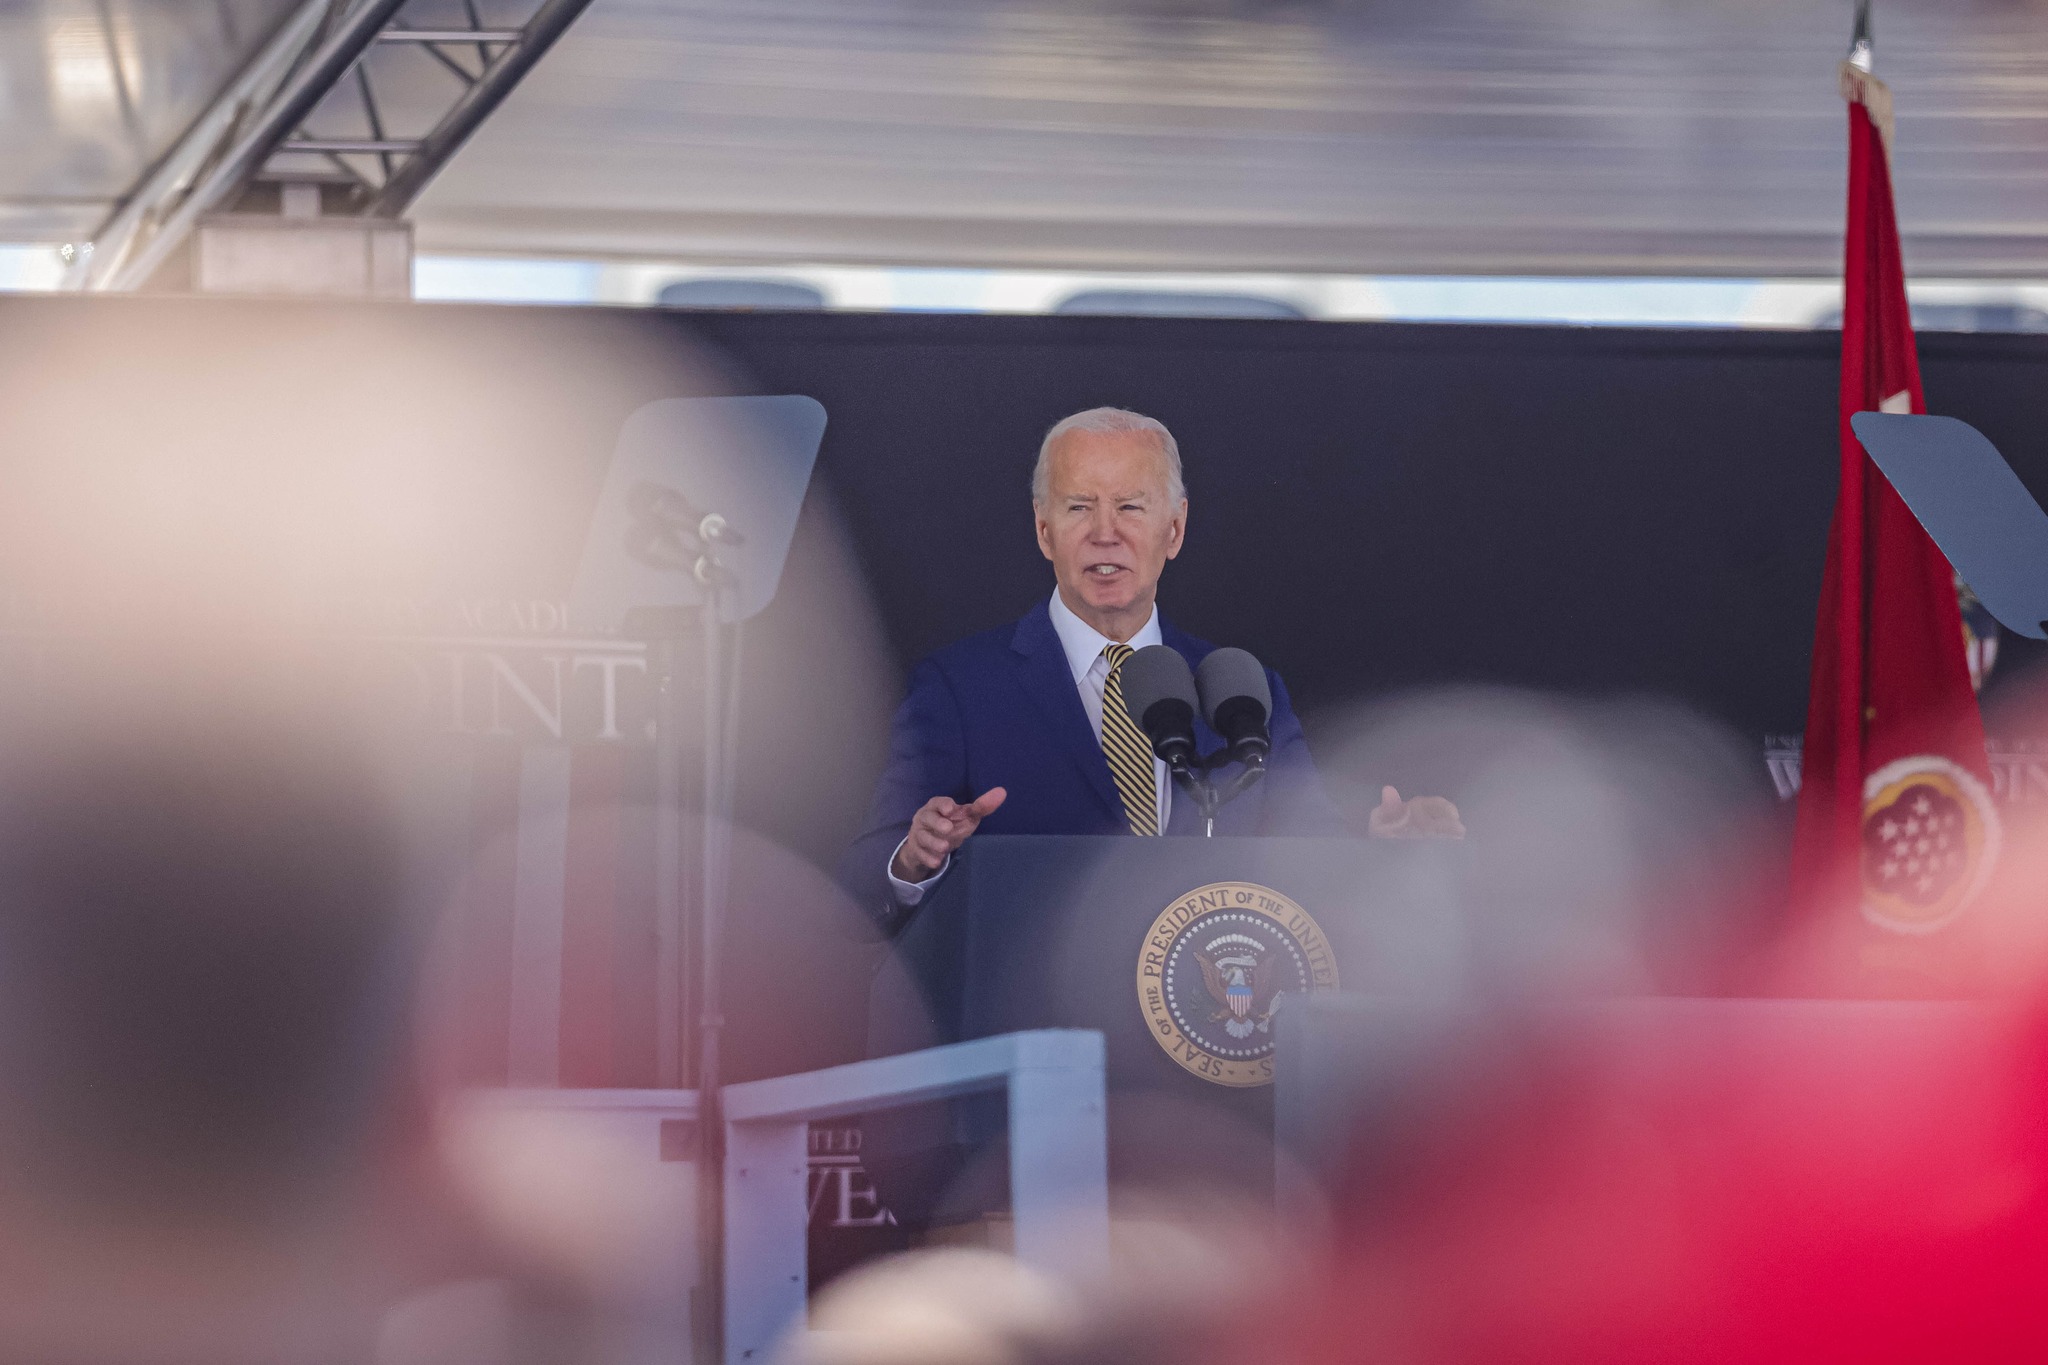 Biden: The United States will firmly support Ukraine in its fight for freedom against the "brutal tyrant"